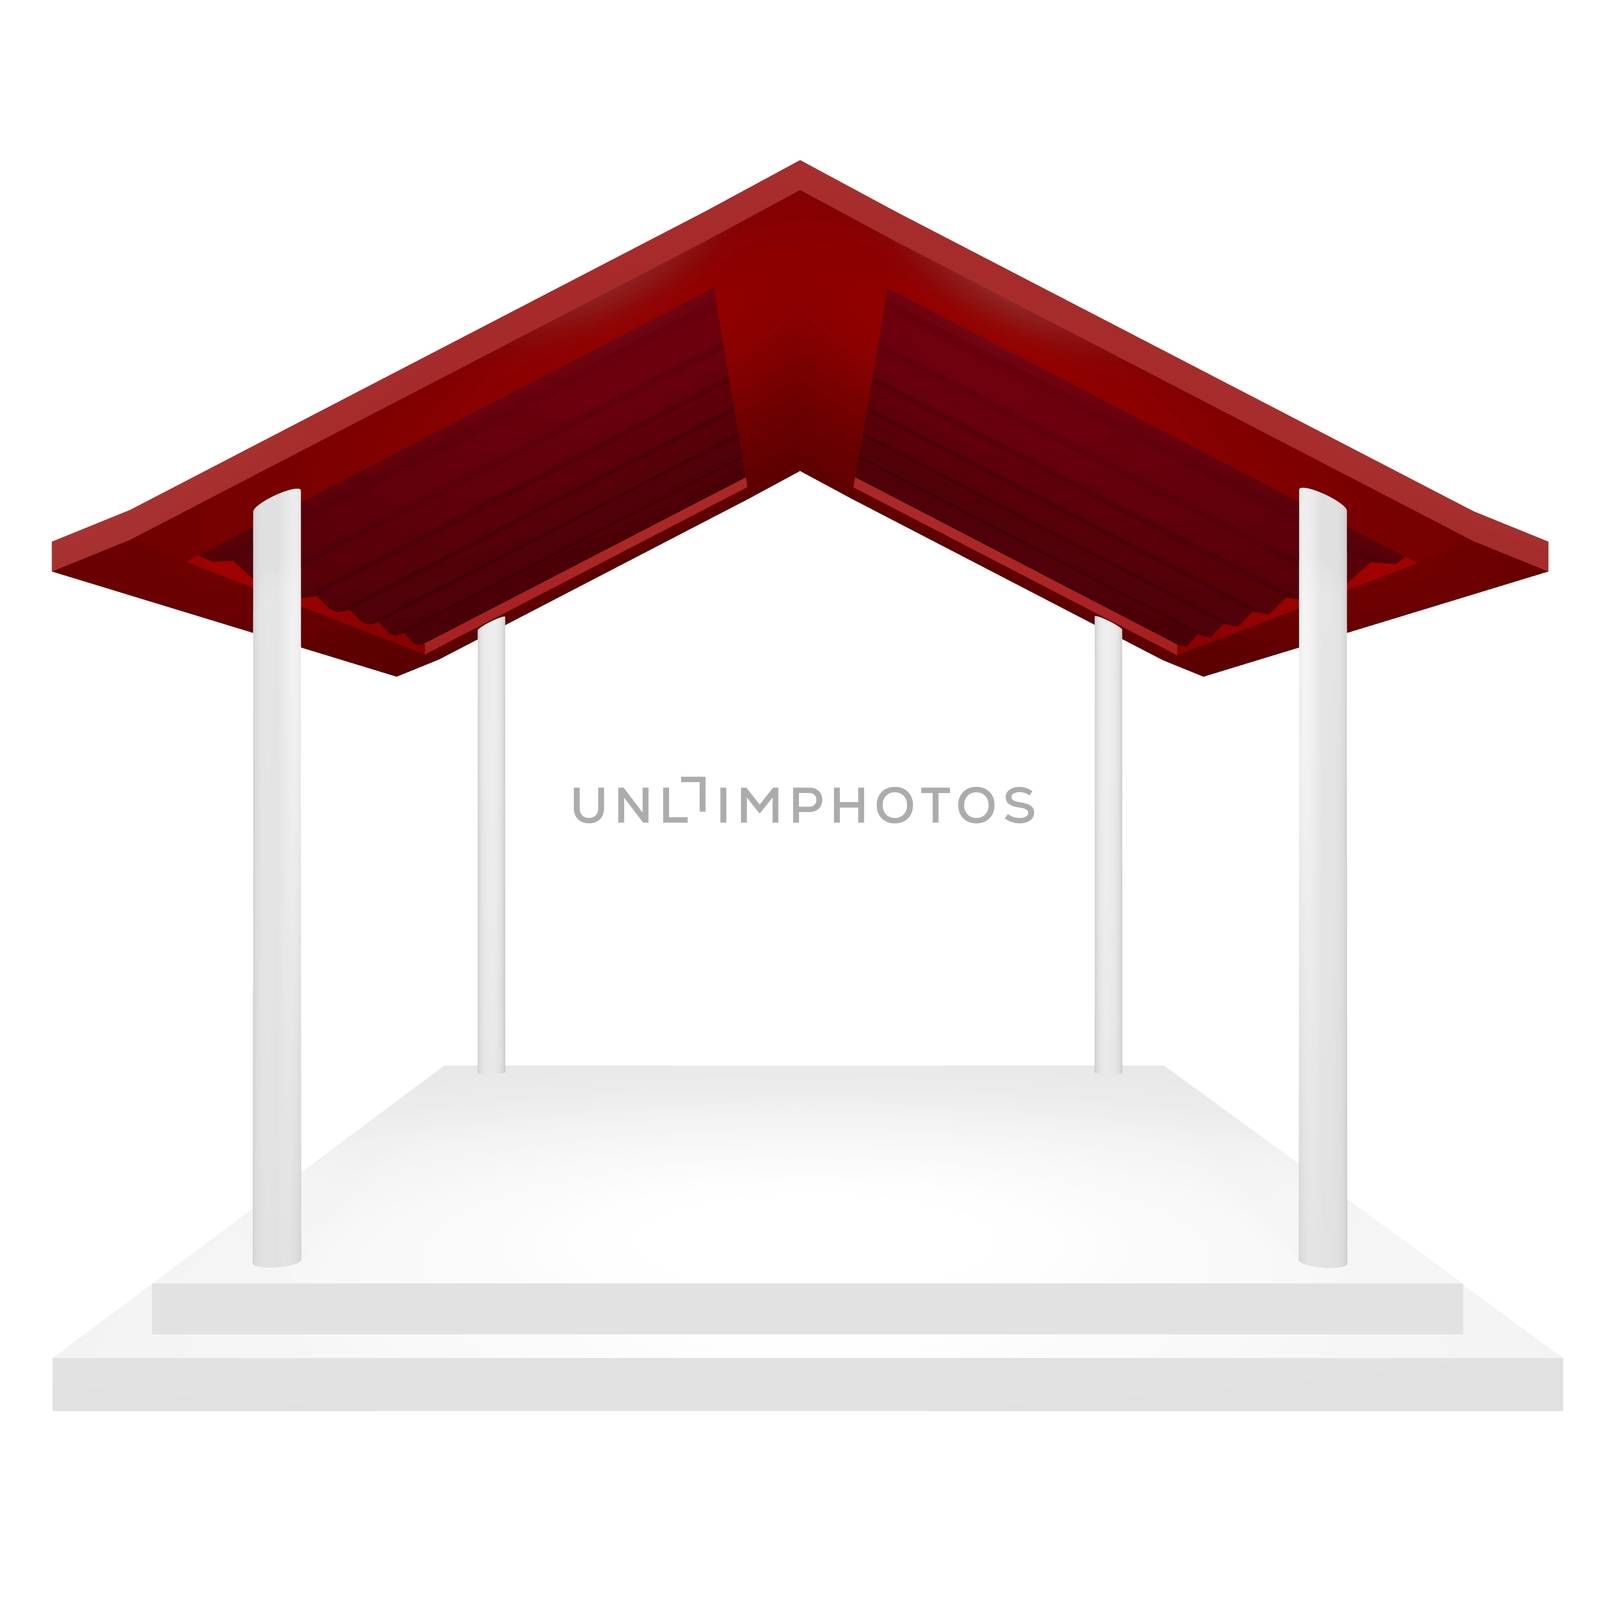 Award ceremony or presentation podium with red roof, and four pillars. This 3d gazebo or rain shelter type structure can be used for protection and coverage concepts, in addition to a product display or award and exhibition platform.
